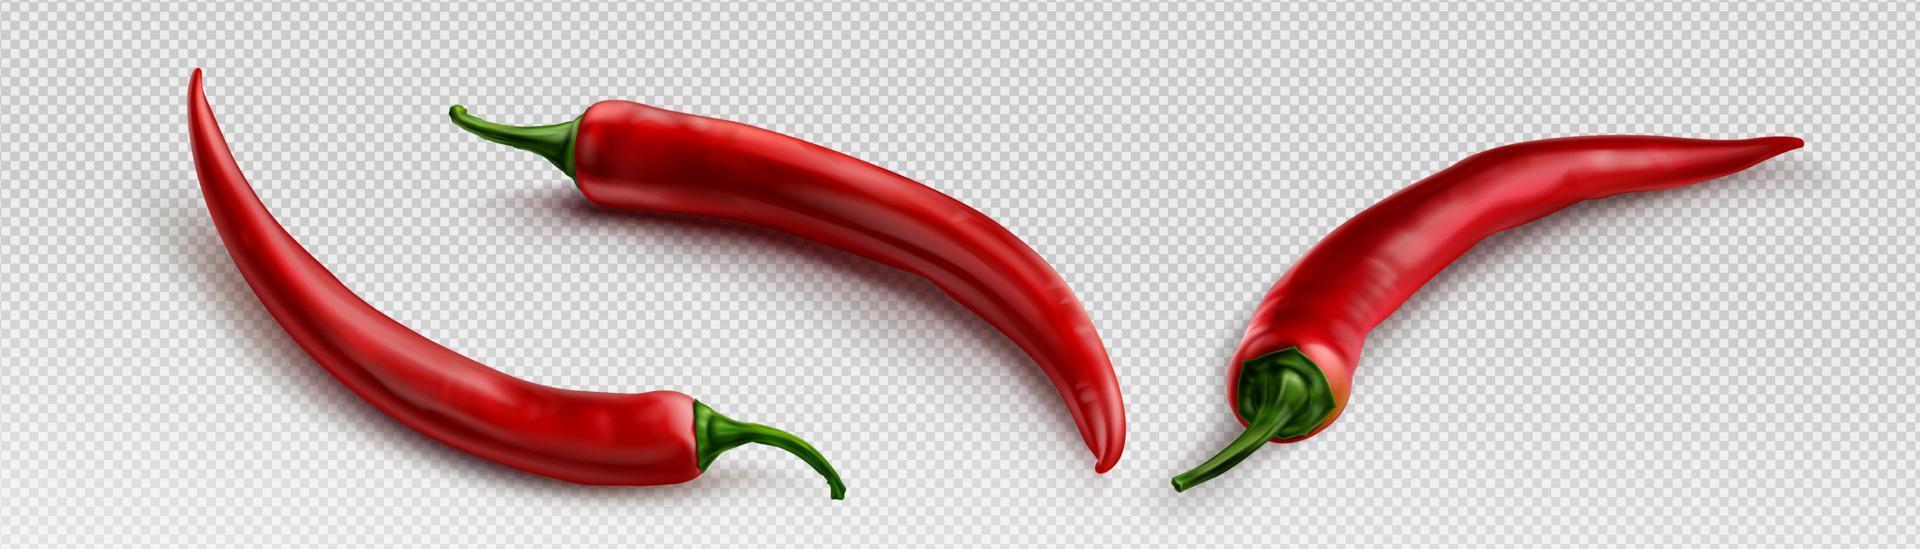 Chili pepper realistic 3d, transparent background vector